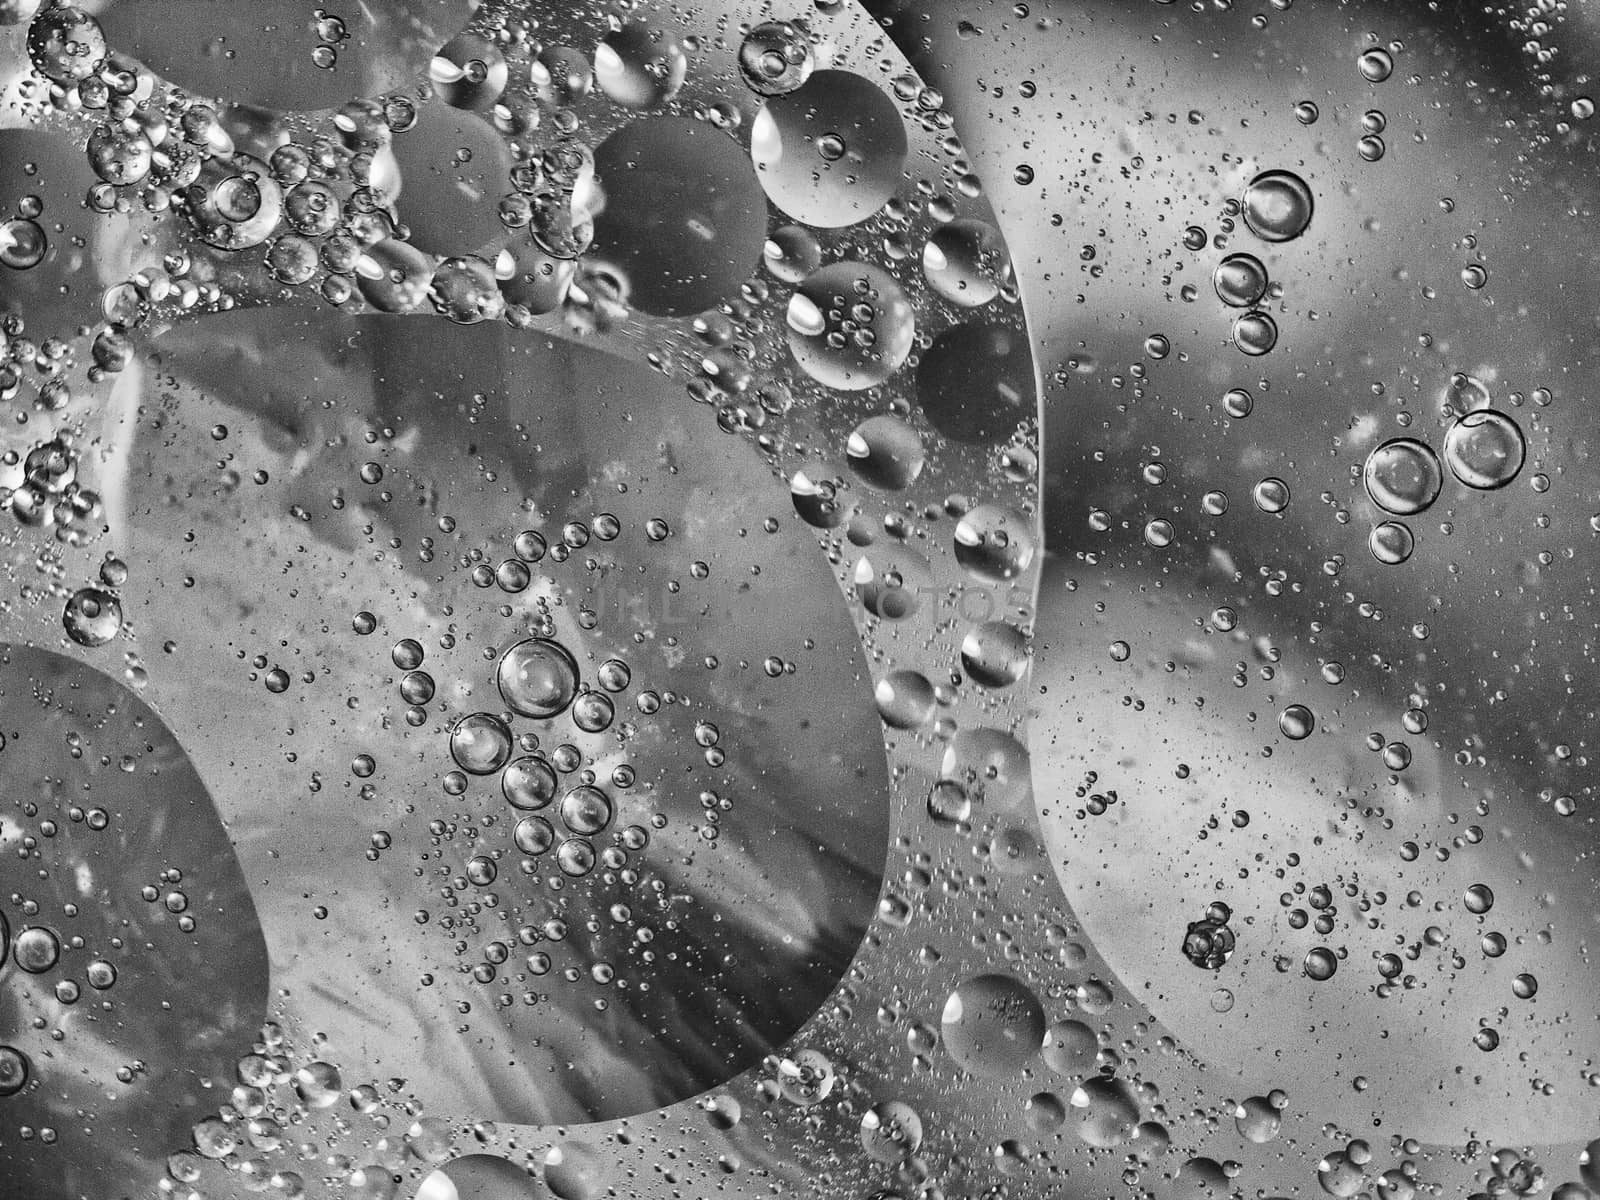 Metallic bubbles in oil by CharlieFloyd